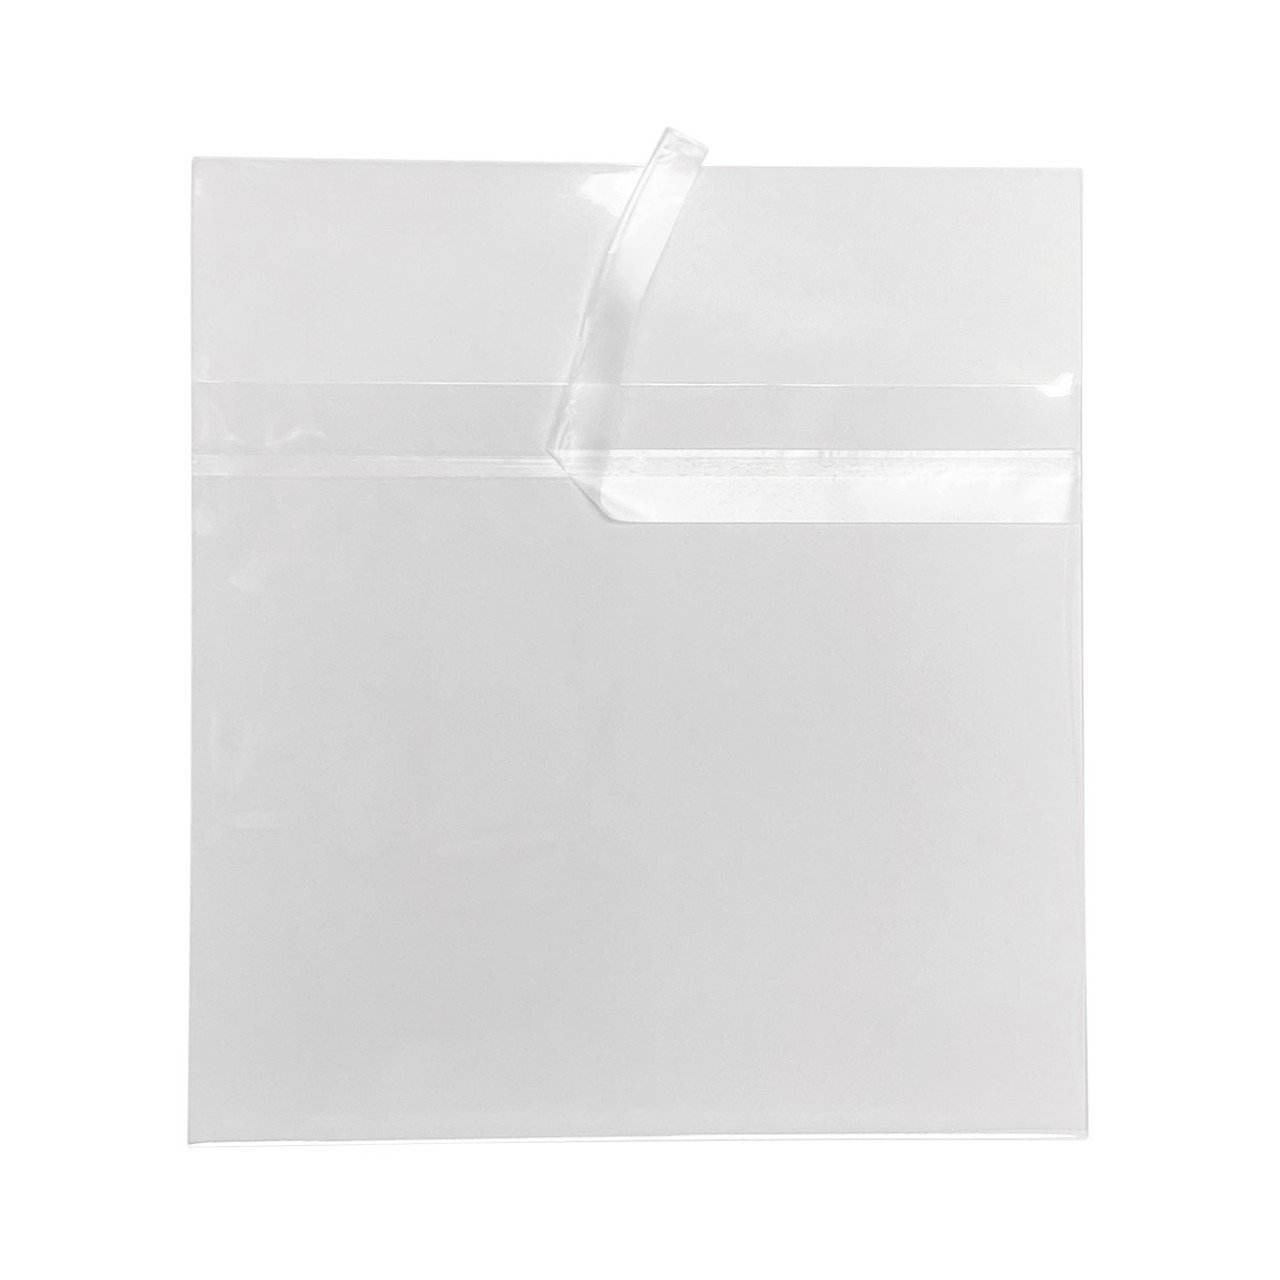 Jot & Mark 4x6 Photo Sleeves (200 Count) | Crystal Clear Archival Plastic  Sleeves with Self Adhesive Resealable Flap